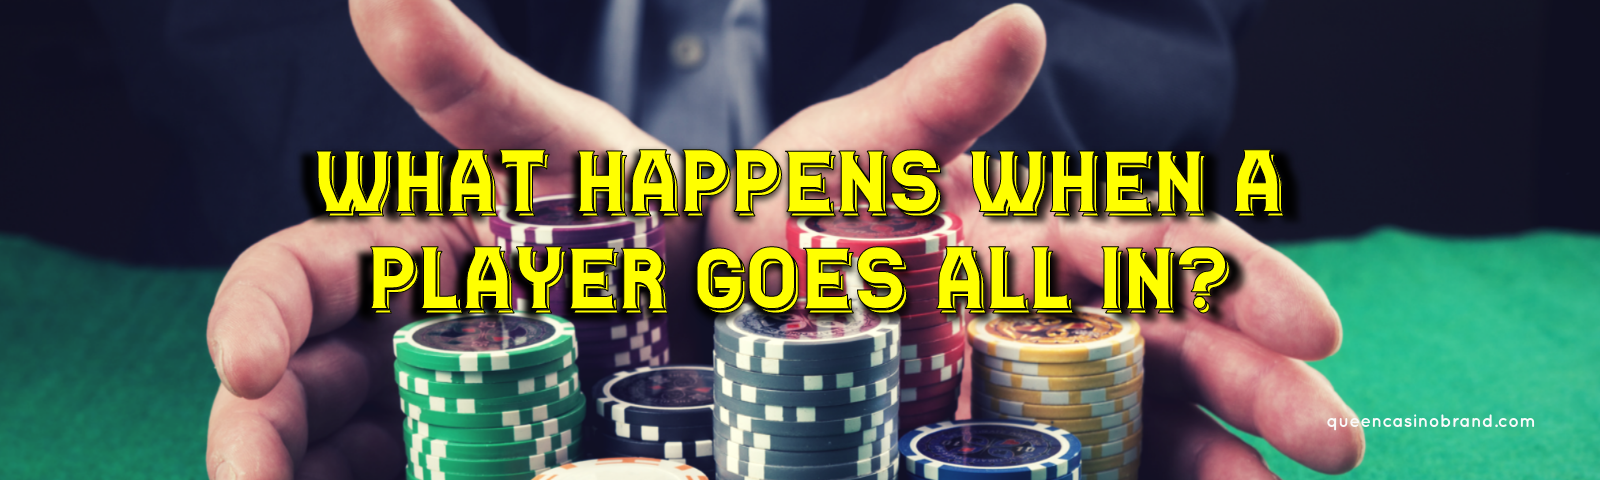 What Happens When a Player Goes All In - Queen Casino Brand